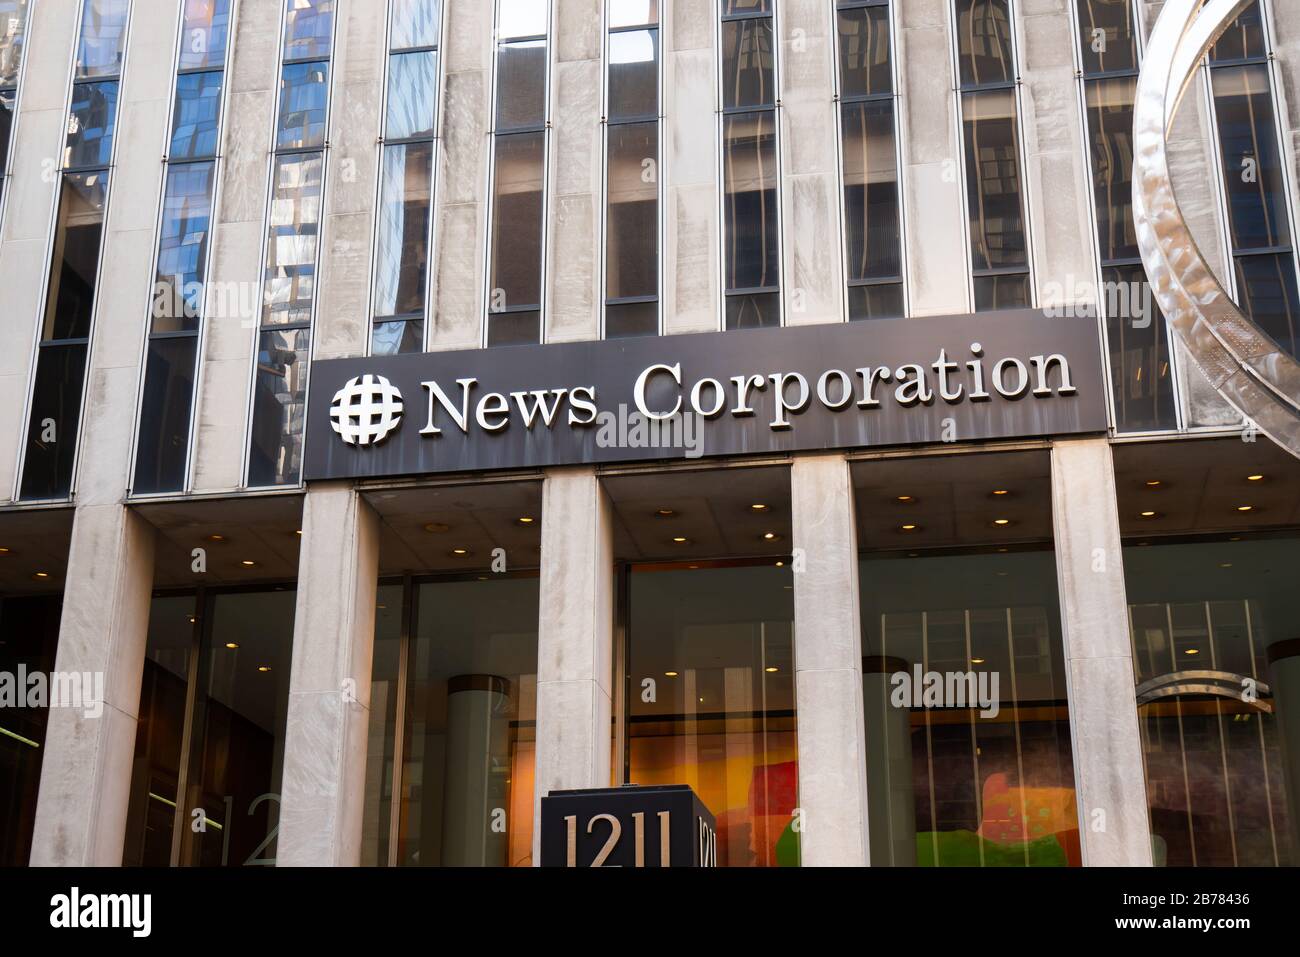 American mass media and publishing company News Corporation logo seen on a building. Stock Photo